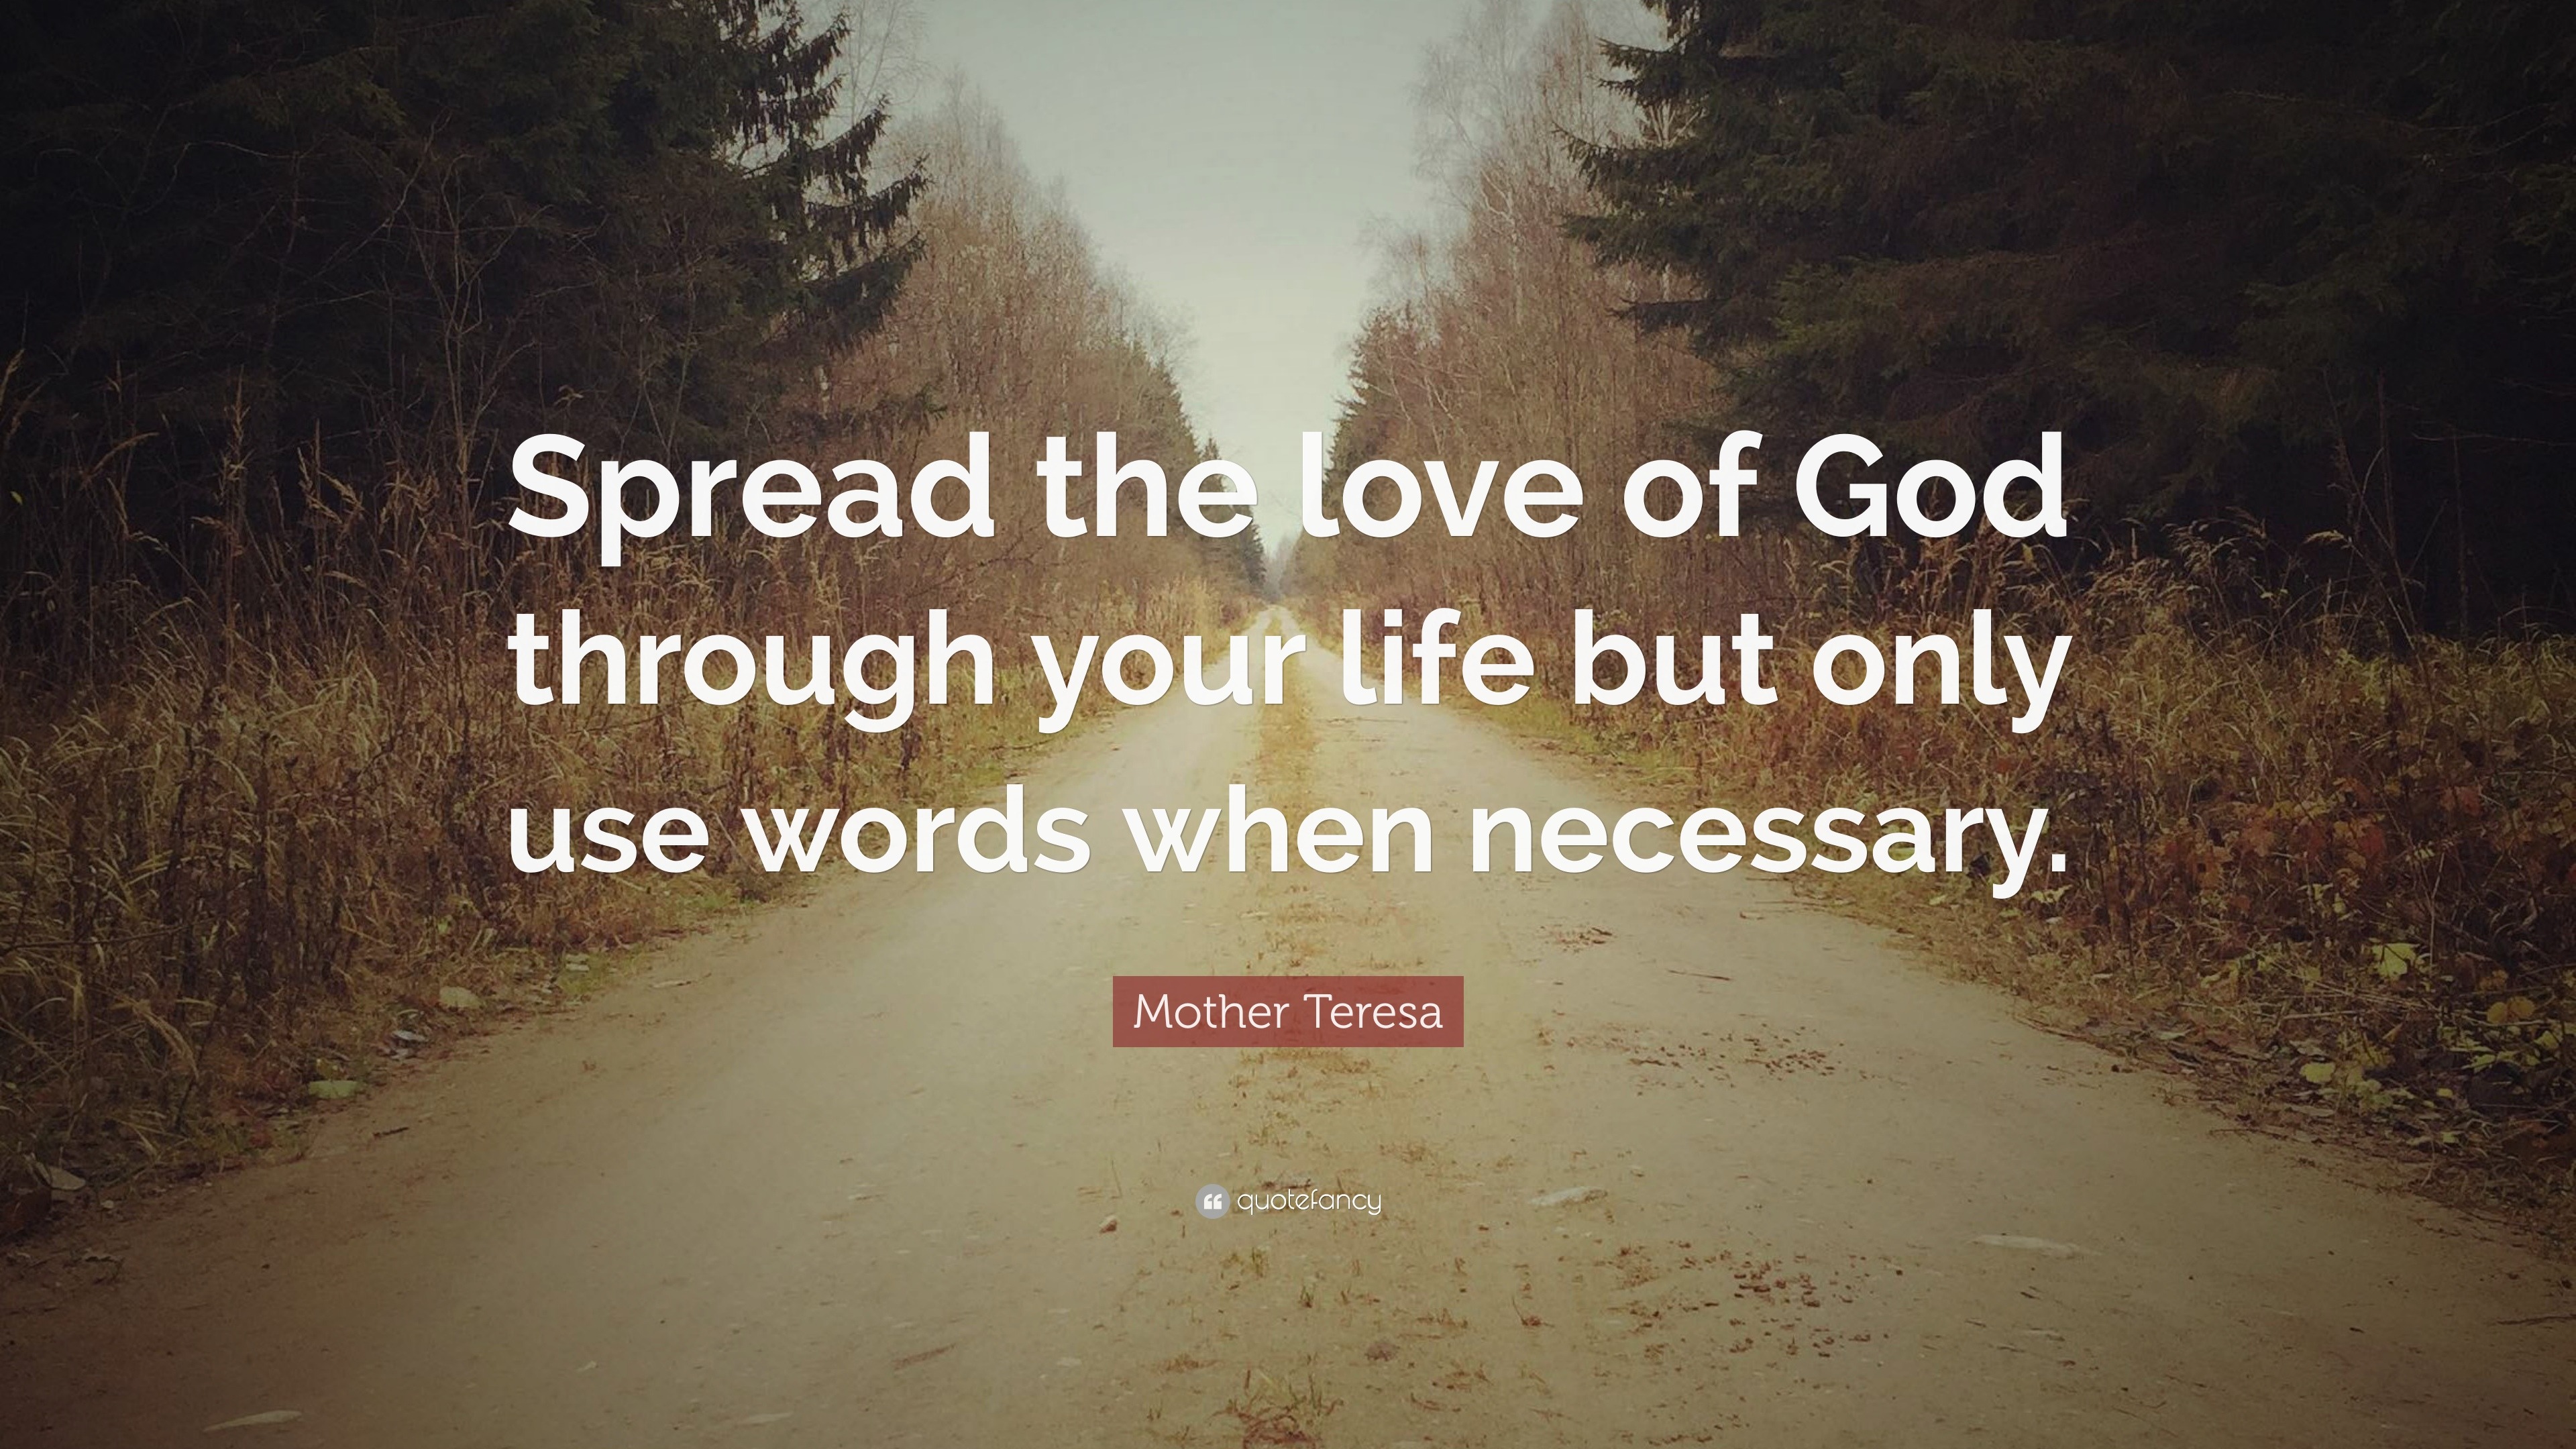 Mother Teresa Quote “Spread the love of God through your life but only use